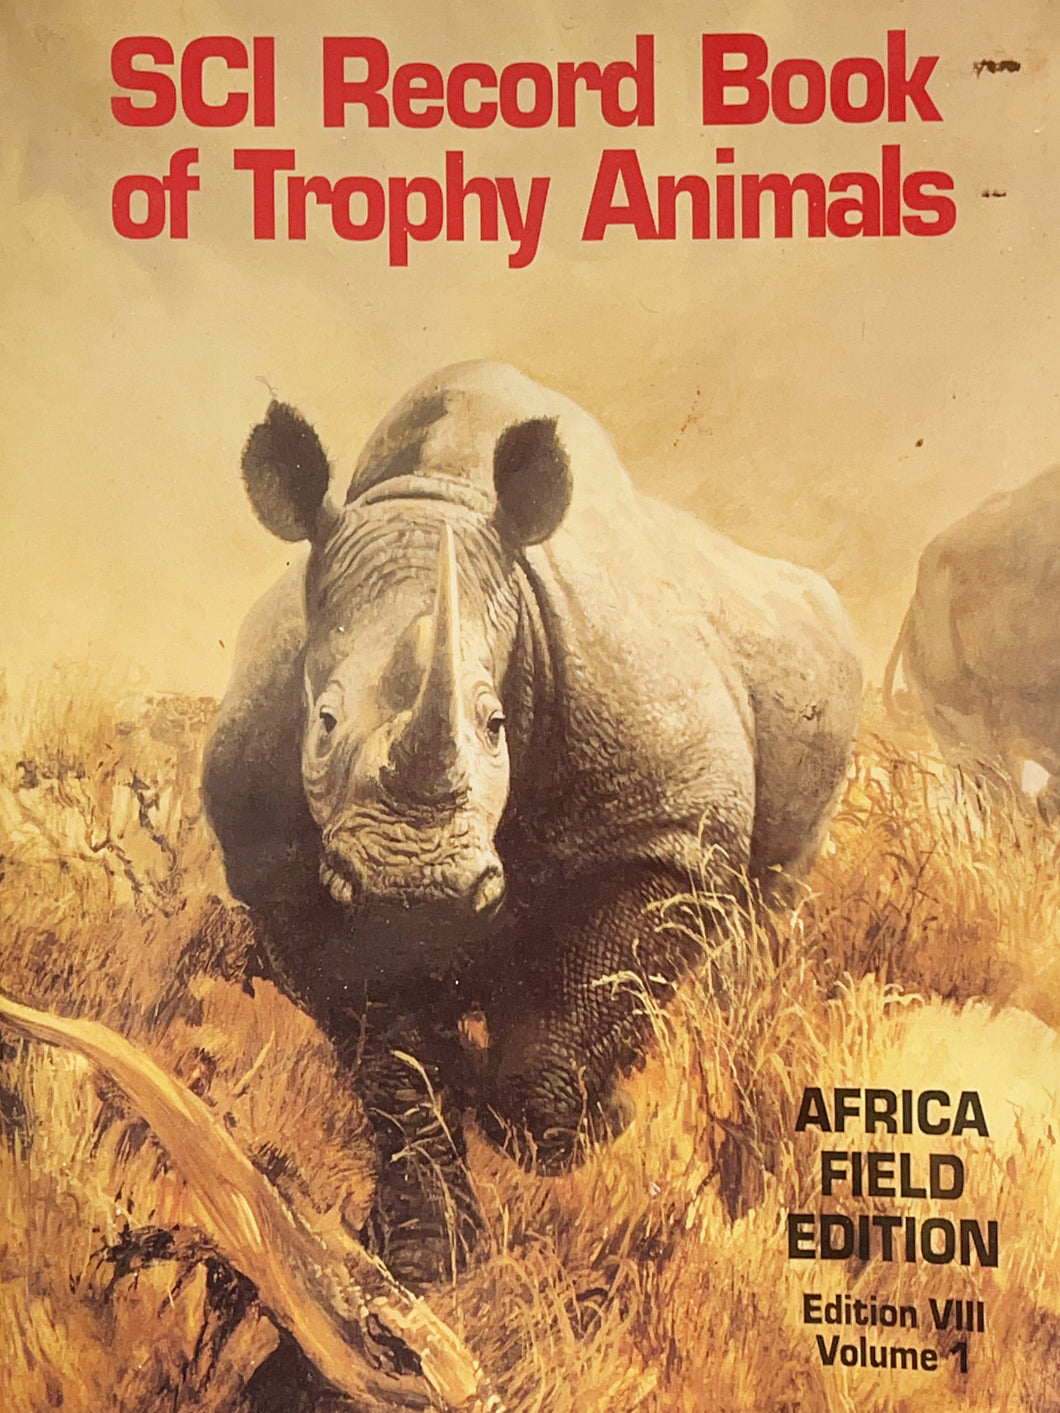 SCI Record Book of Trophy Animals: Africa Field Edition (1993)